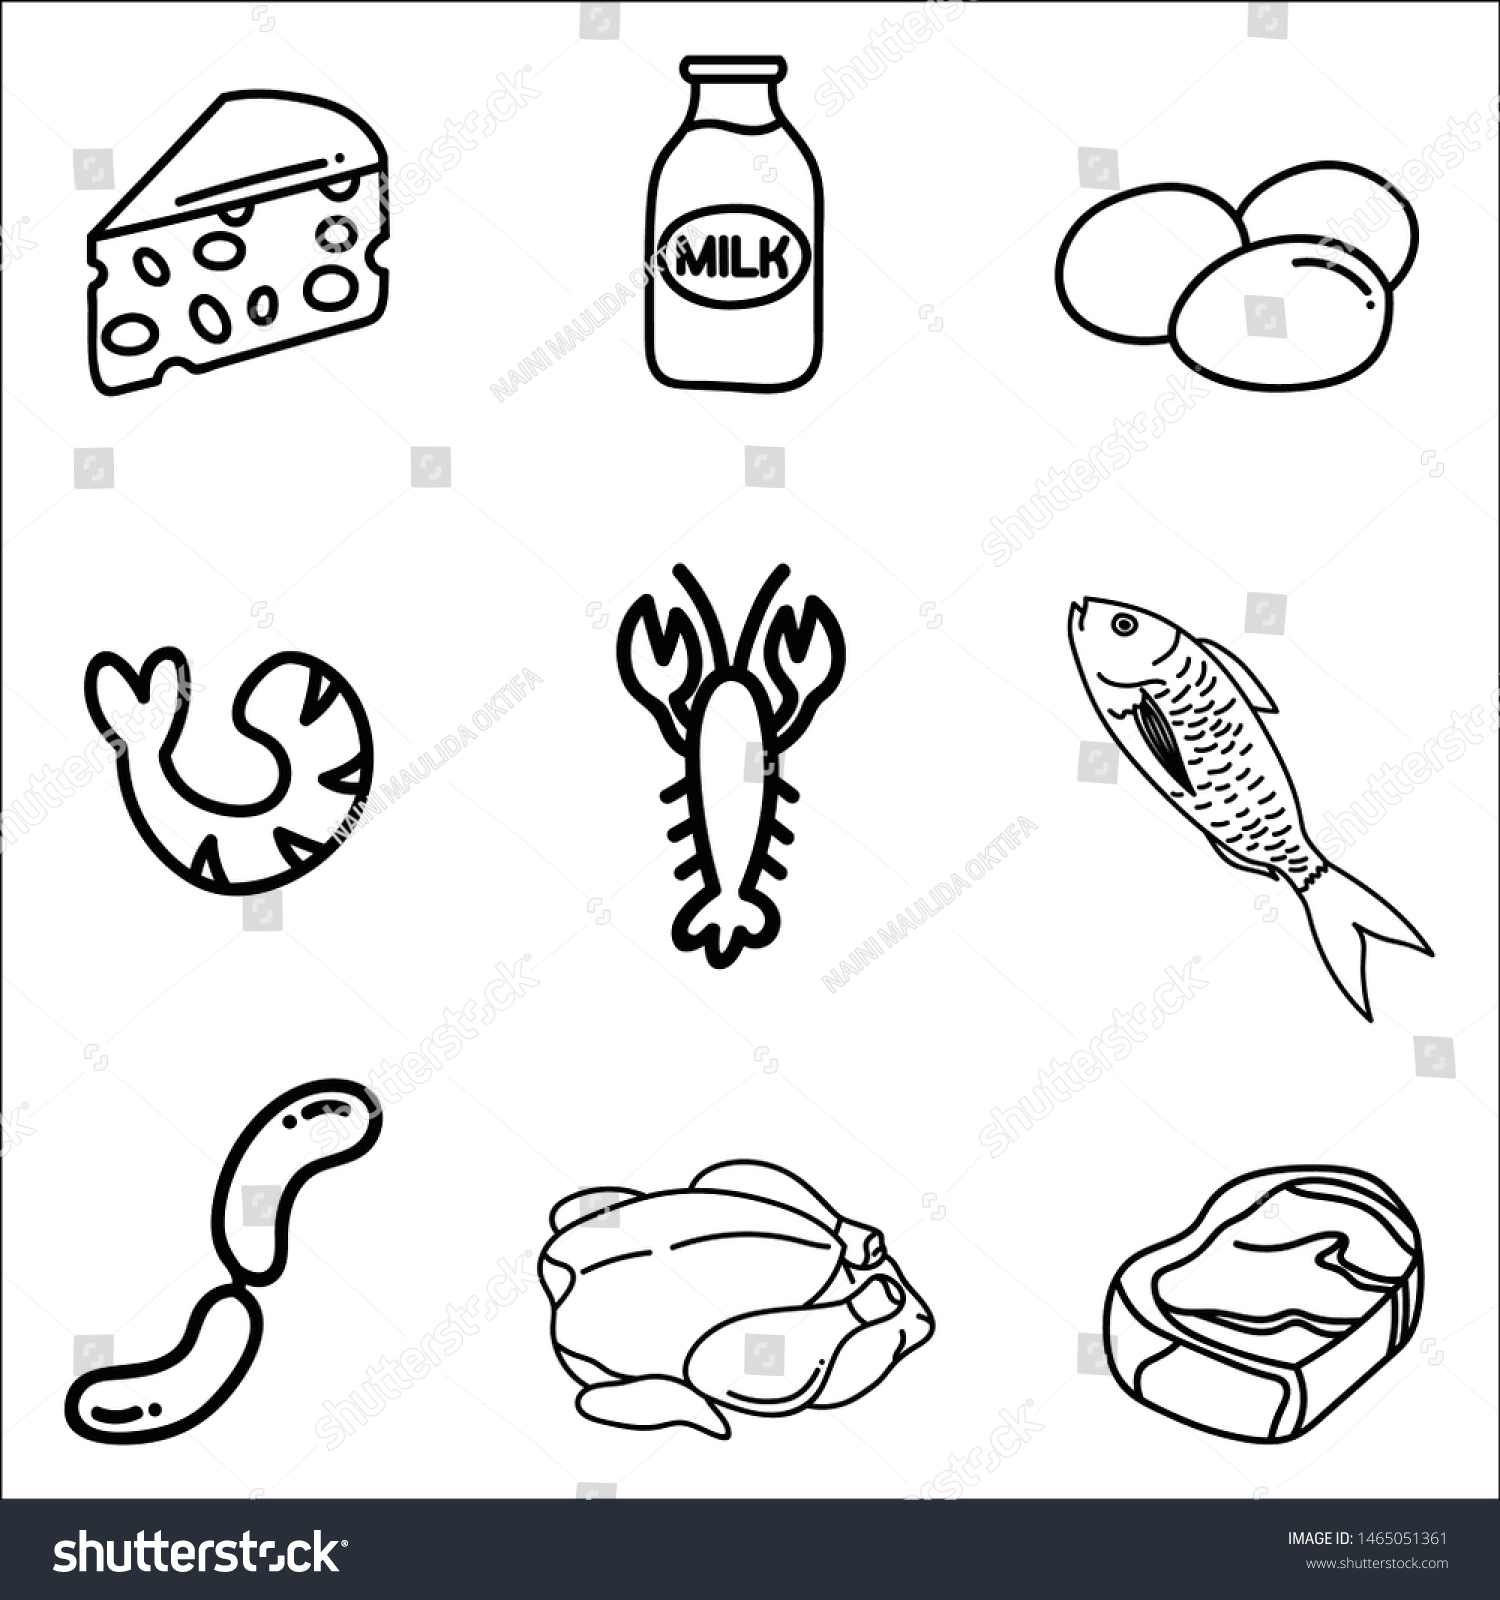 Protein Food Icons Collection For Healthy Diet Royalty Free Stock Vector 1465051361 1191